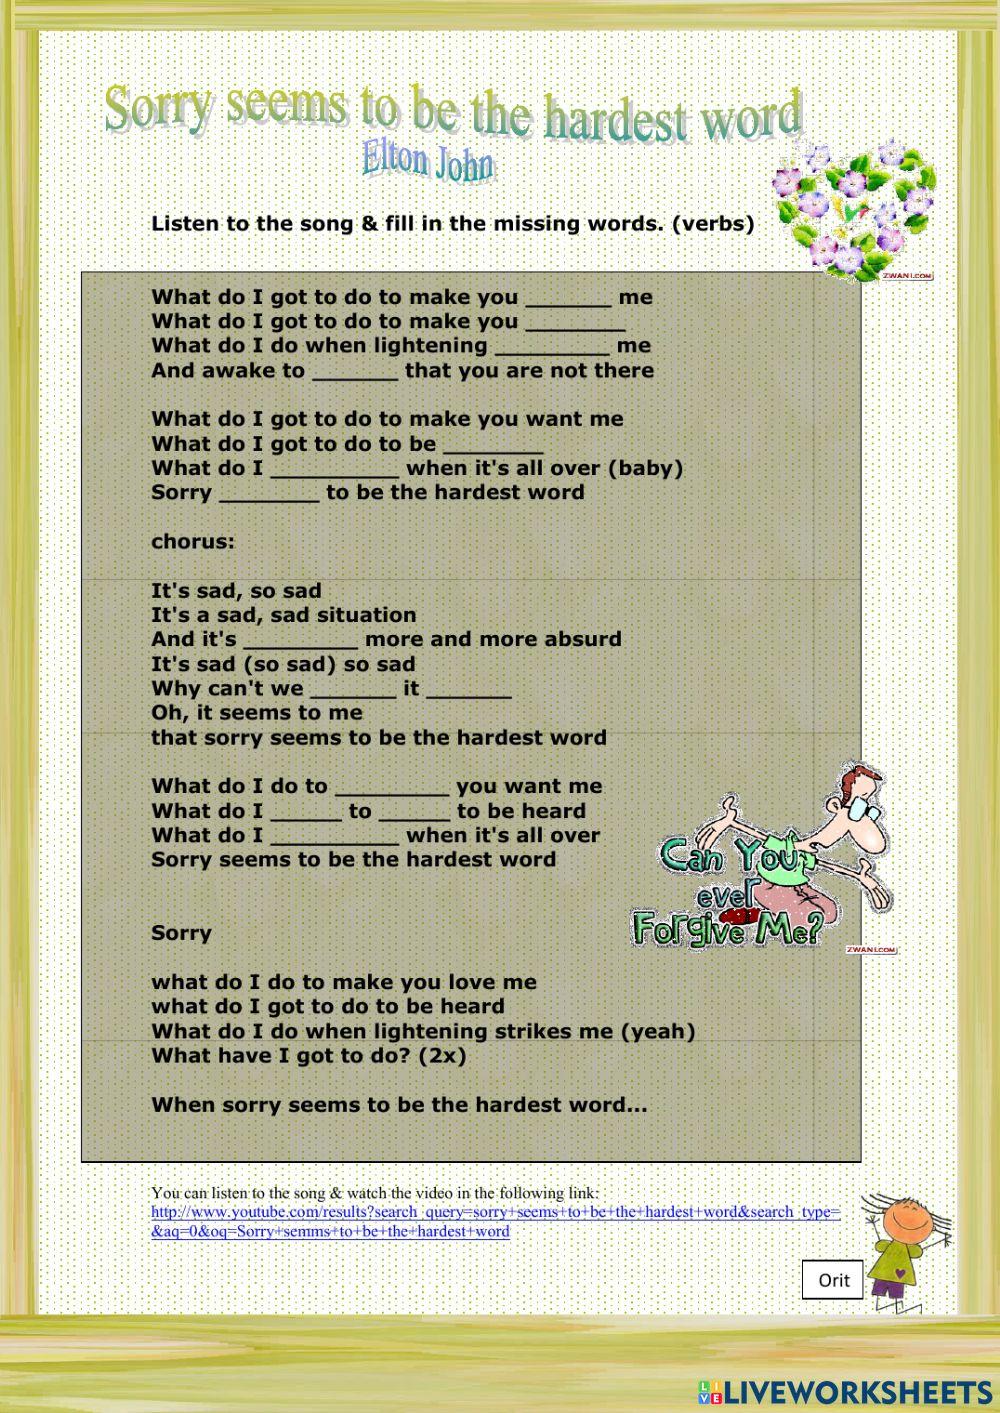 Sorry seems to be the hardest word worksheet | Live Worksheets